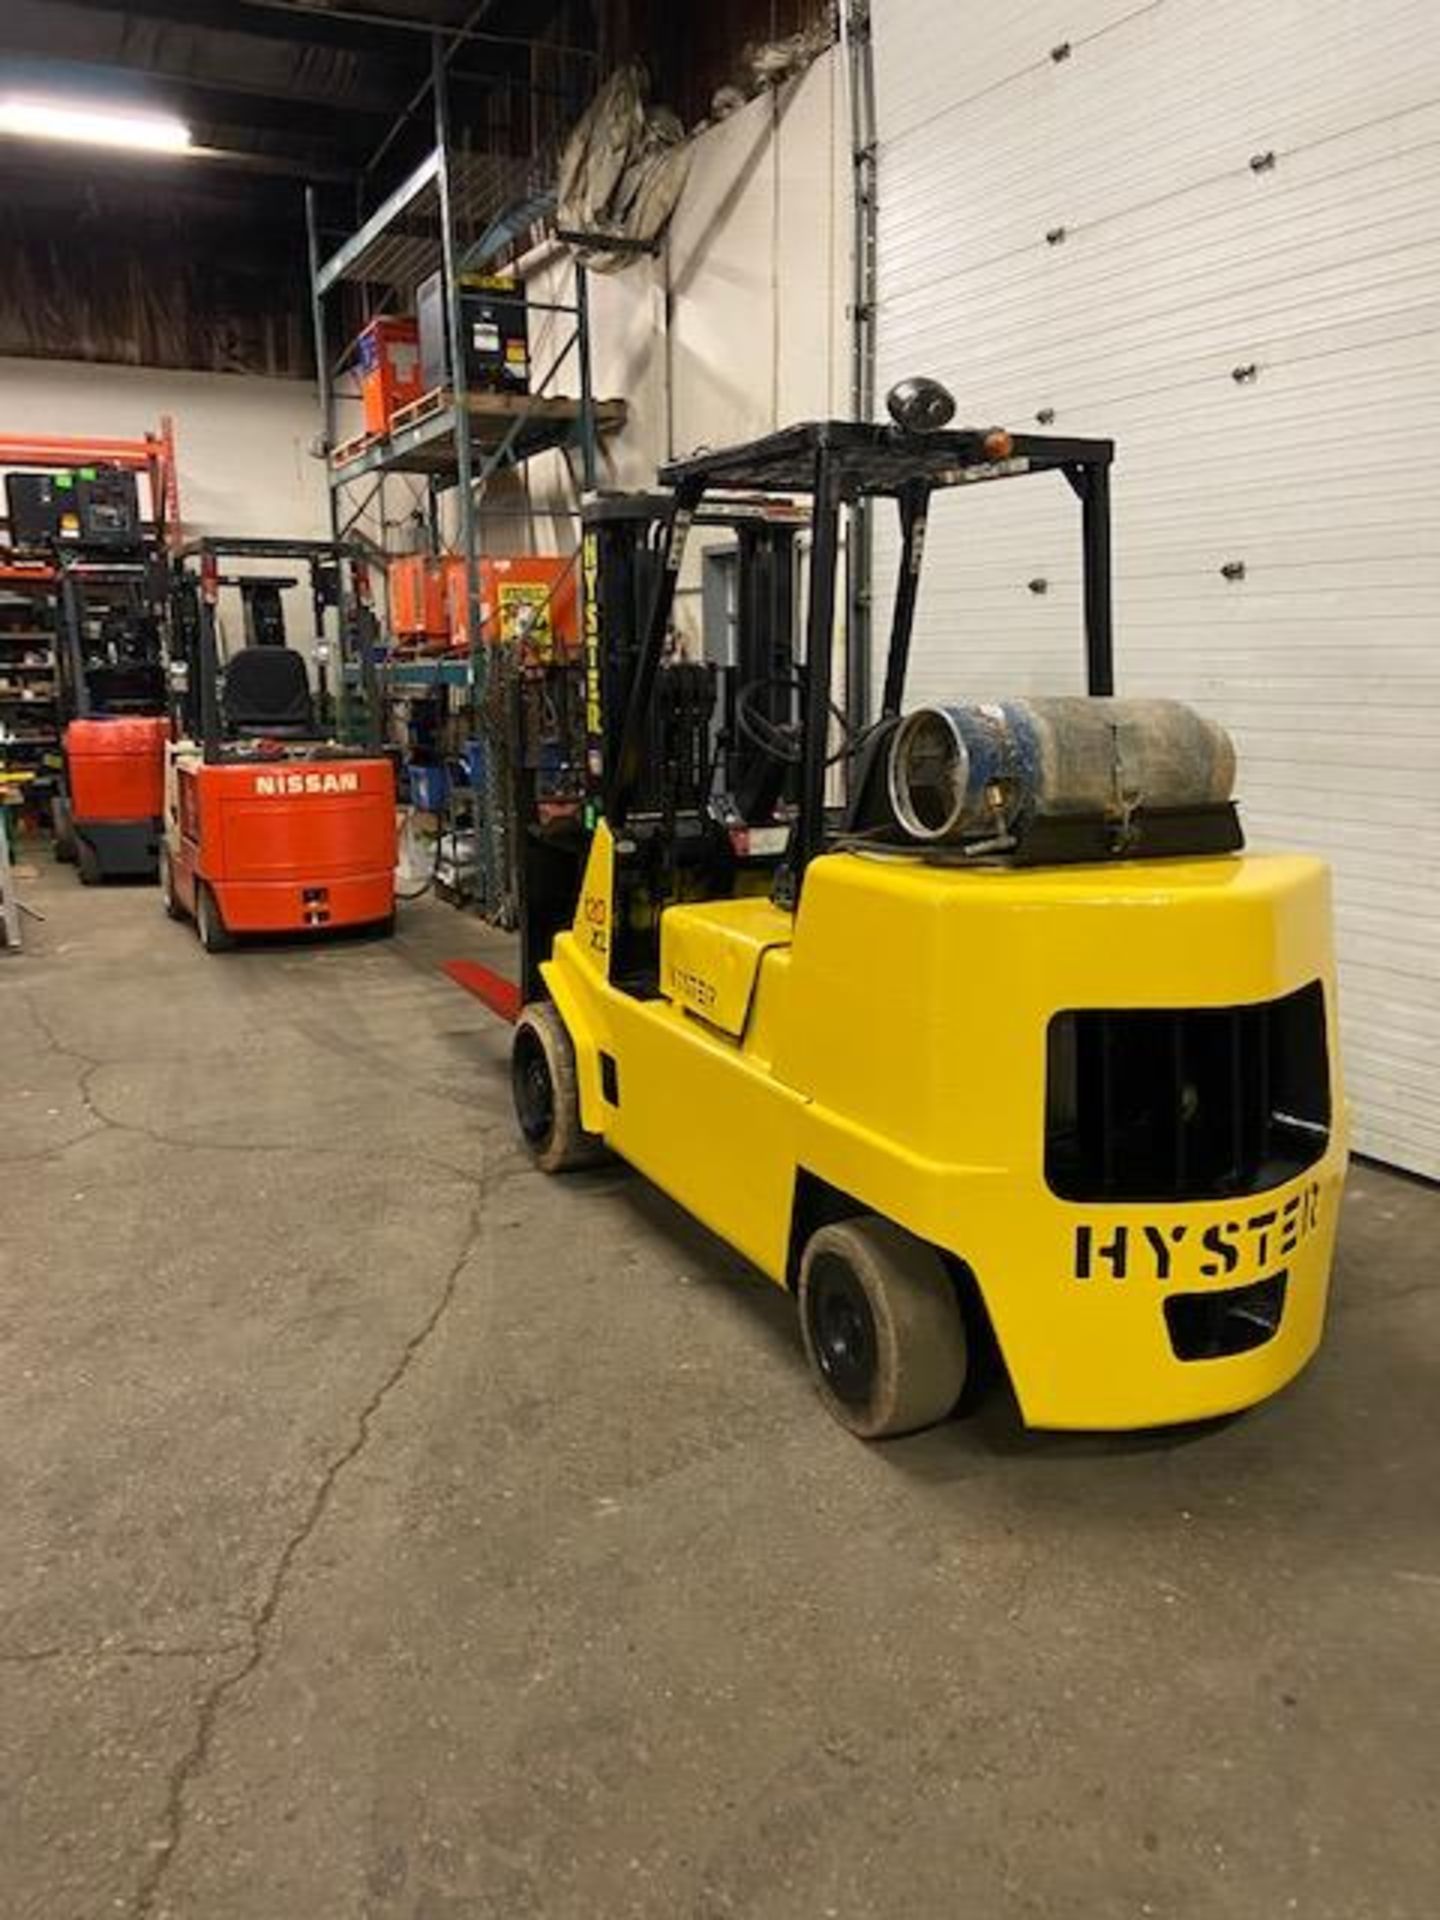 FREE CUSTOMS - Hyster 12000lbs Capacity Forklift 120XL LPG (propane) (no propane tank included) - Image 3 of 3